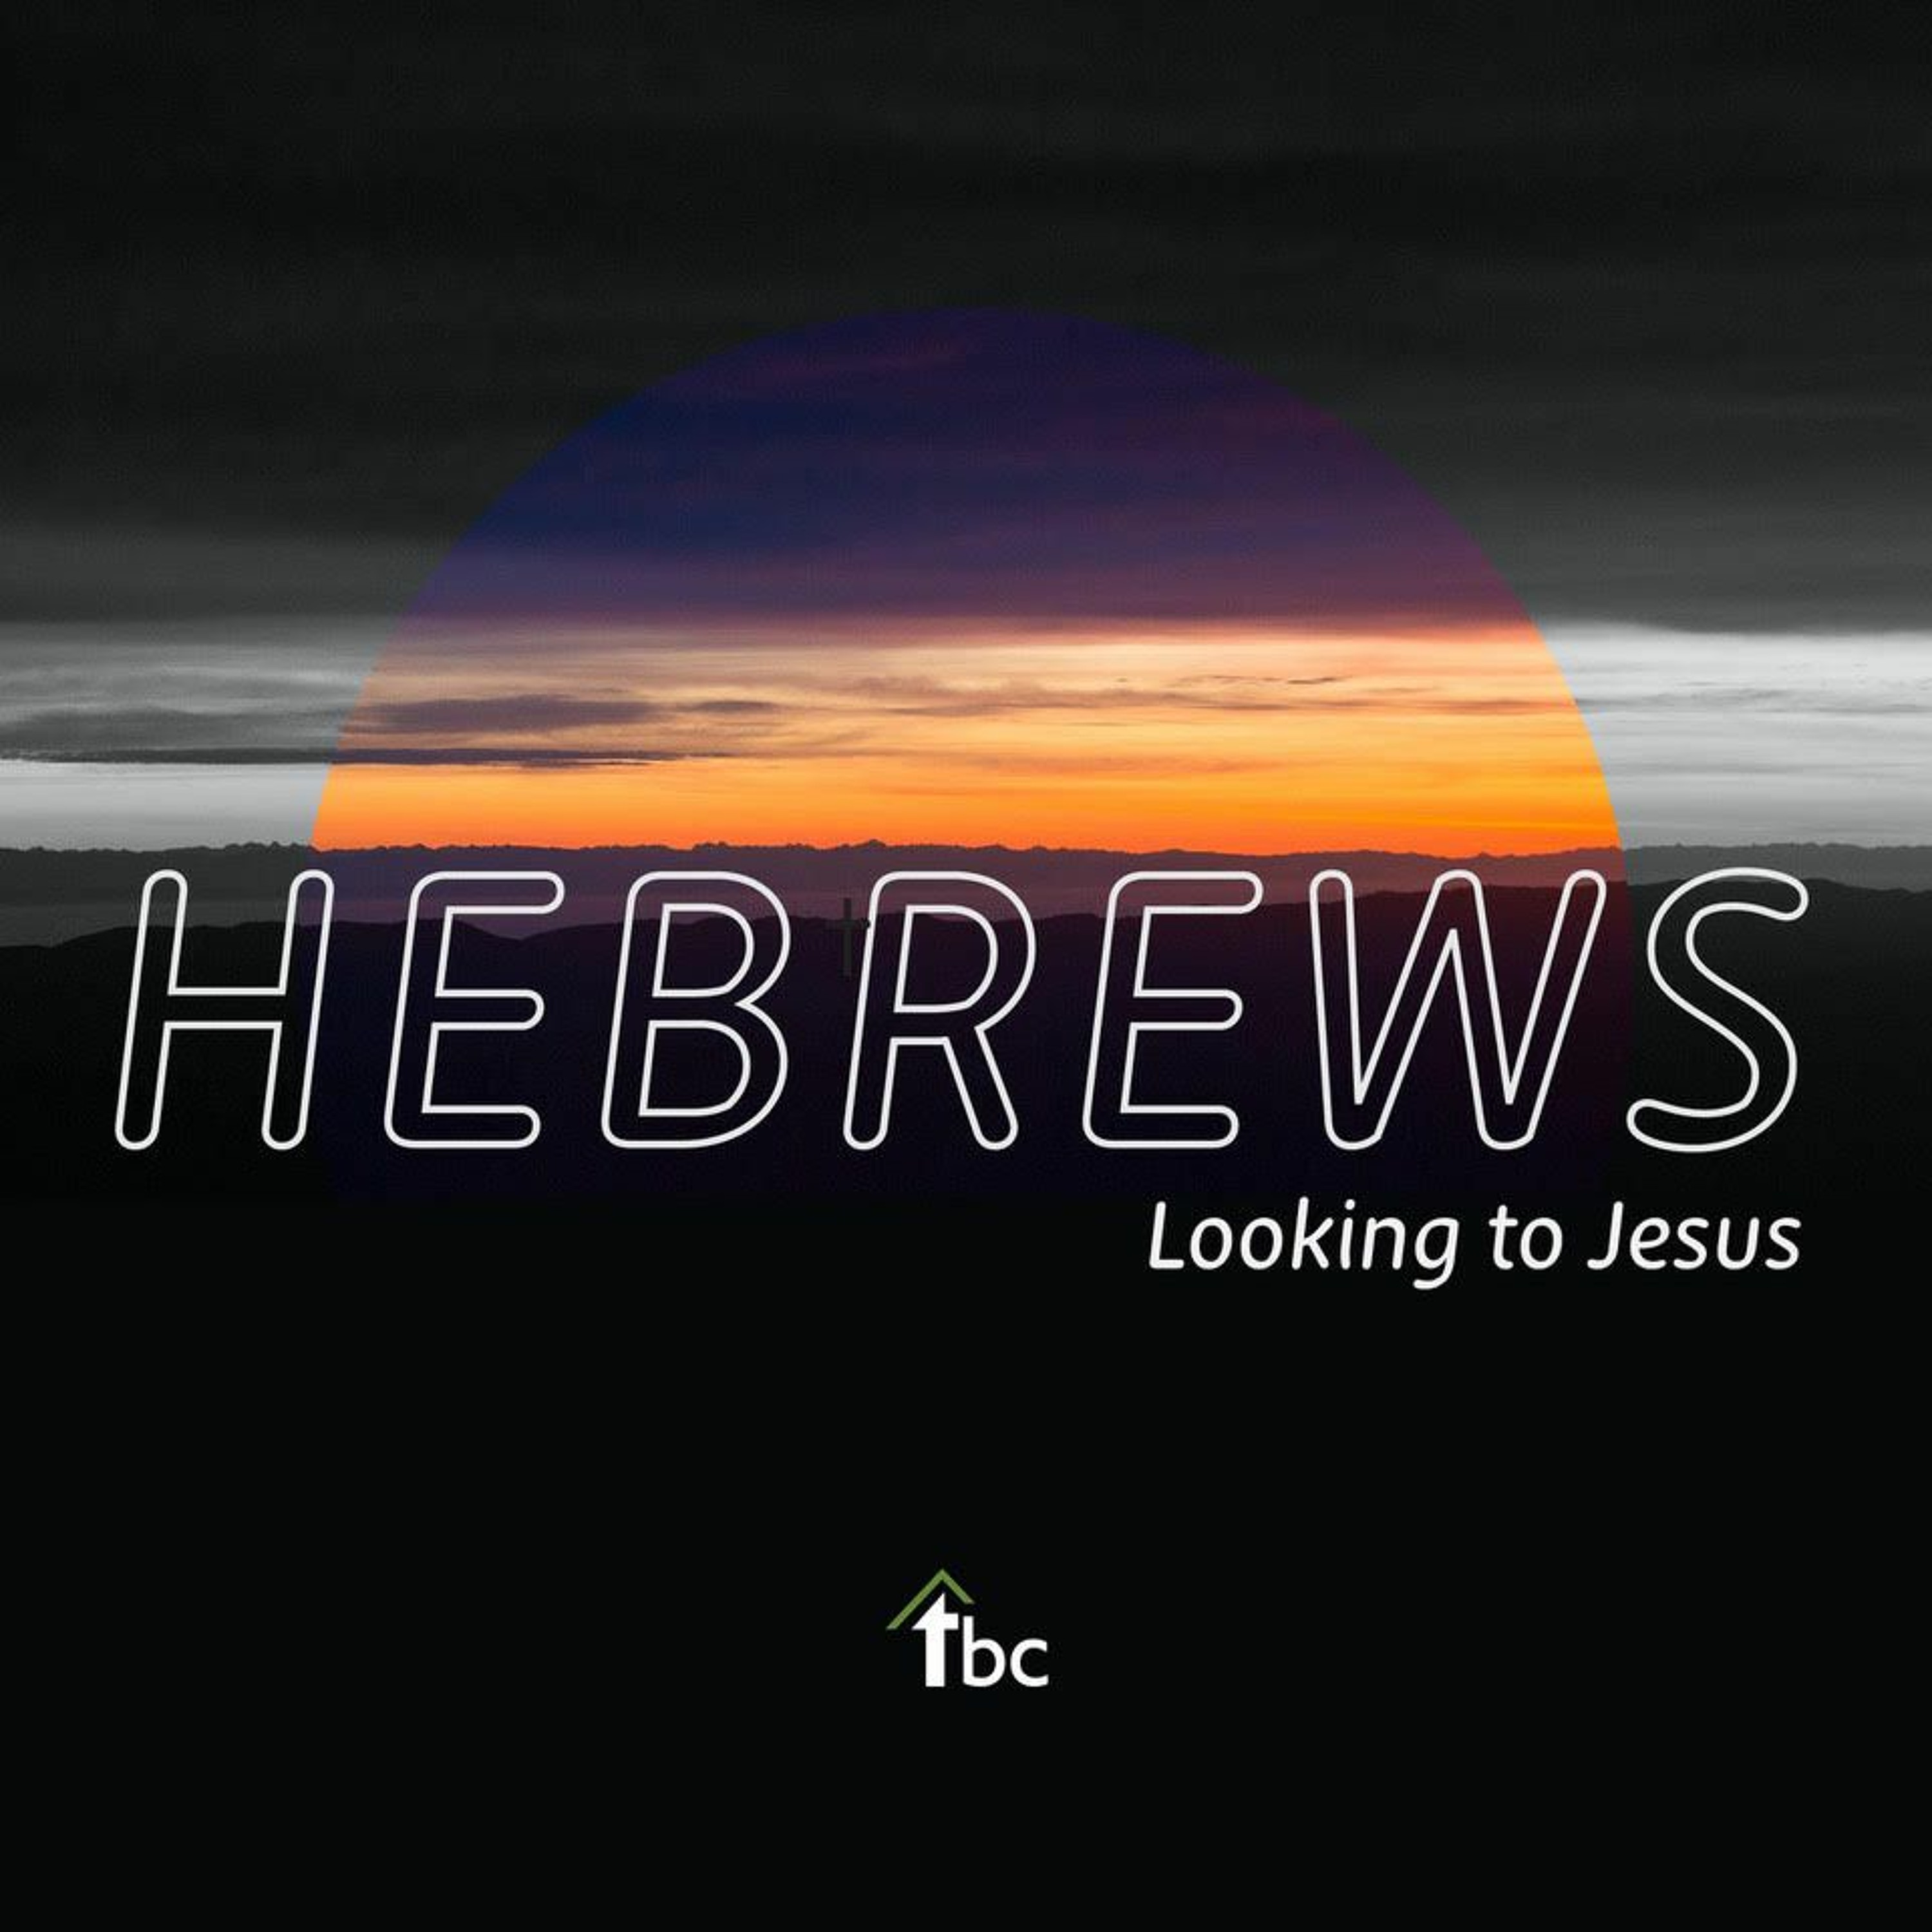 Why Is Every Sunday School Answer Jesus? (Hebrews 8:6-13)